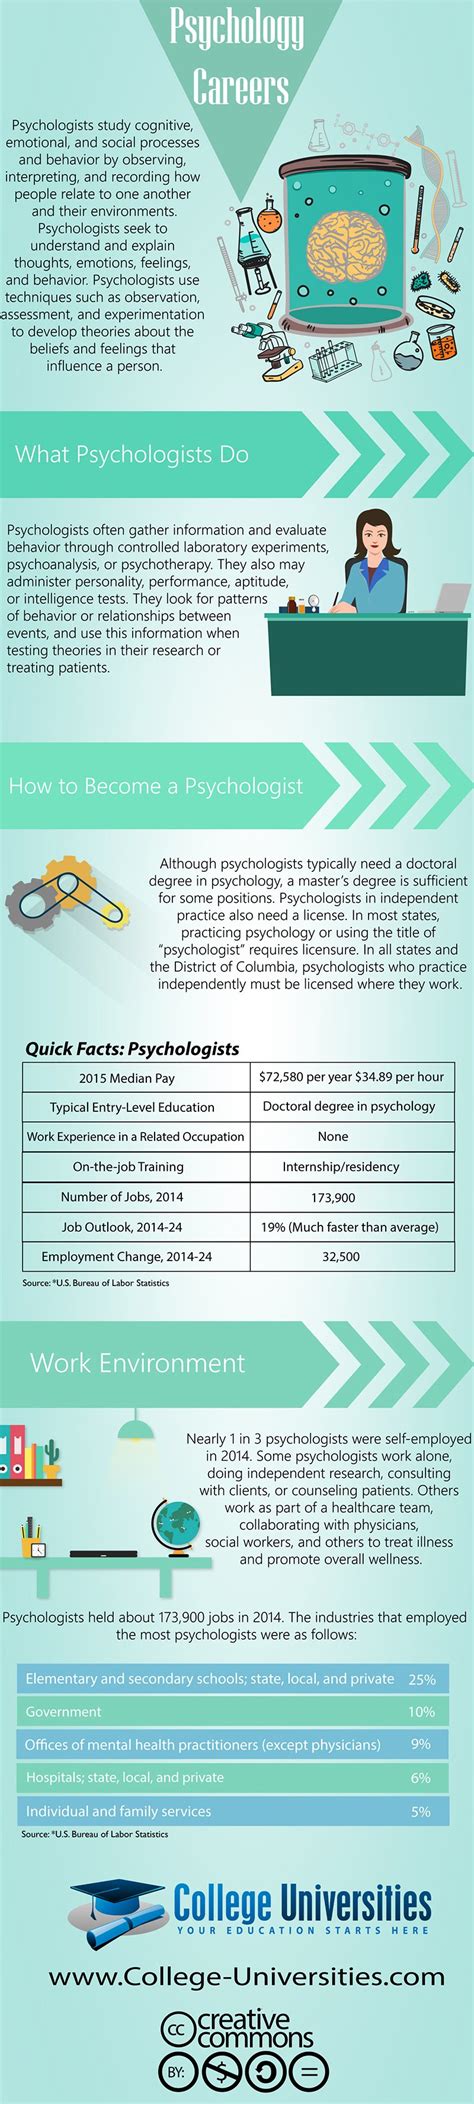 Top 10 Psychology Careers Infographic